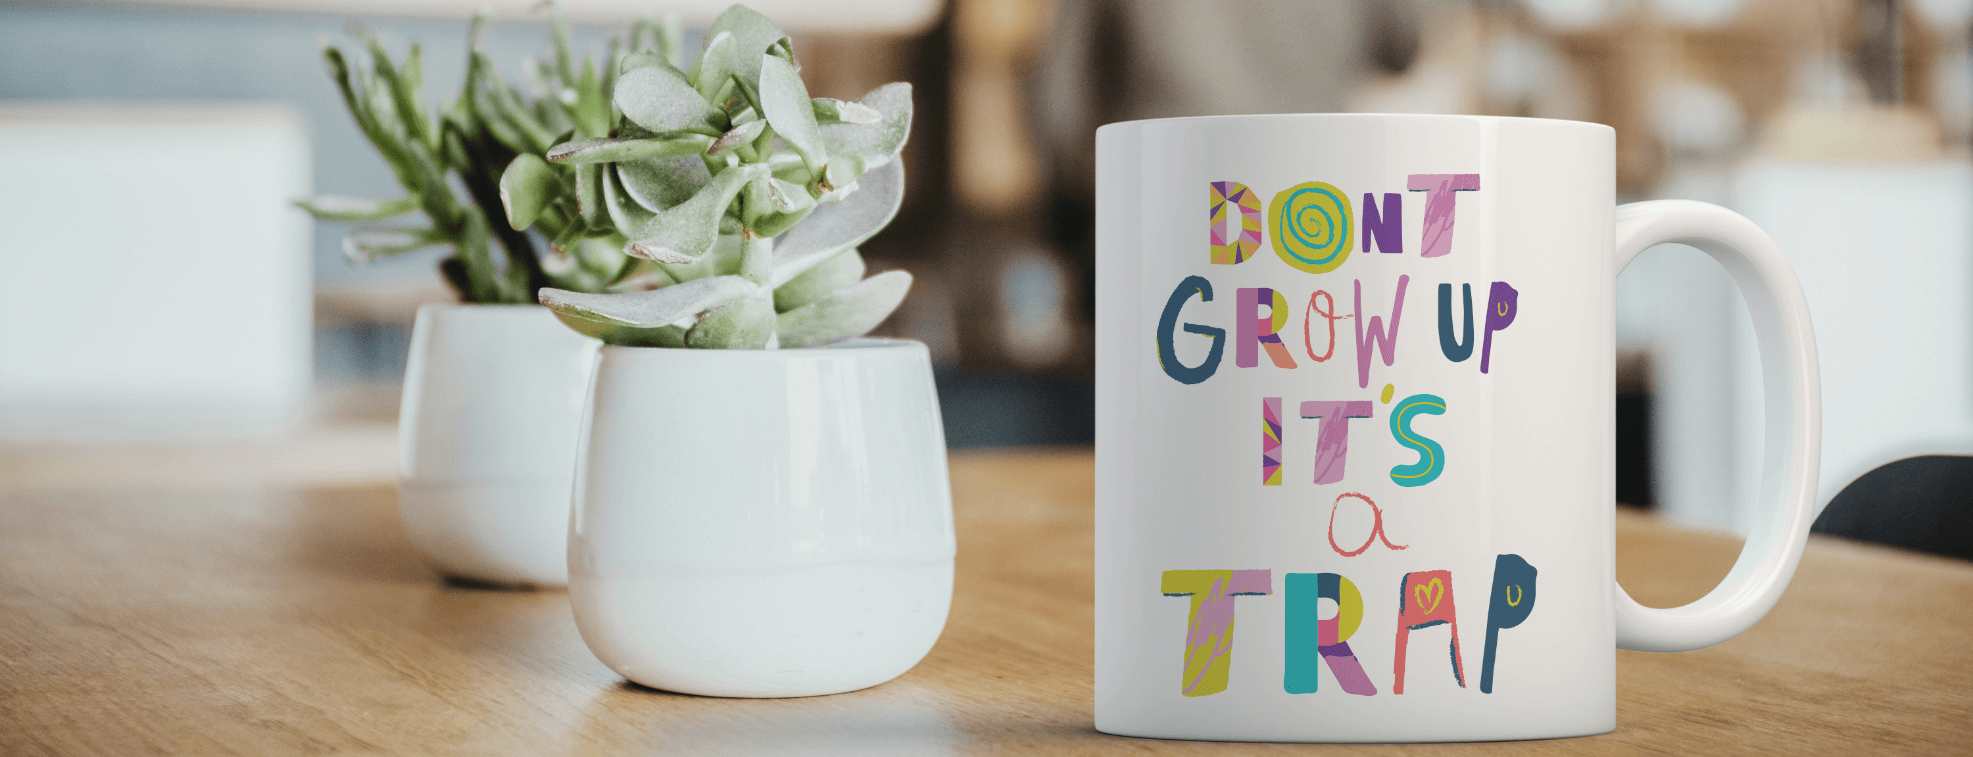 Cool custom white mug on a table with "Don't grow up it's a trap" written on it